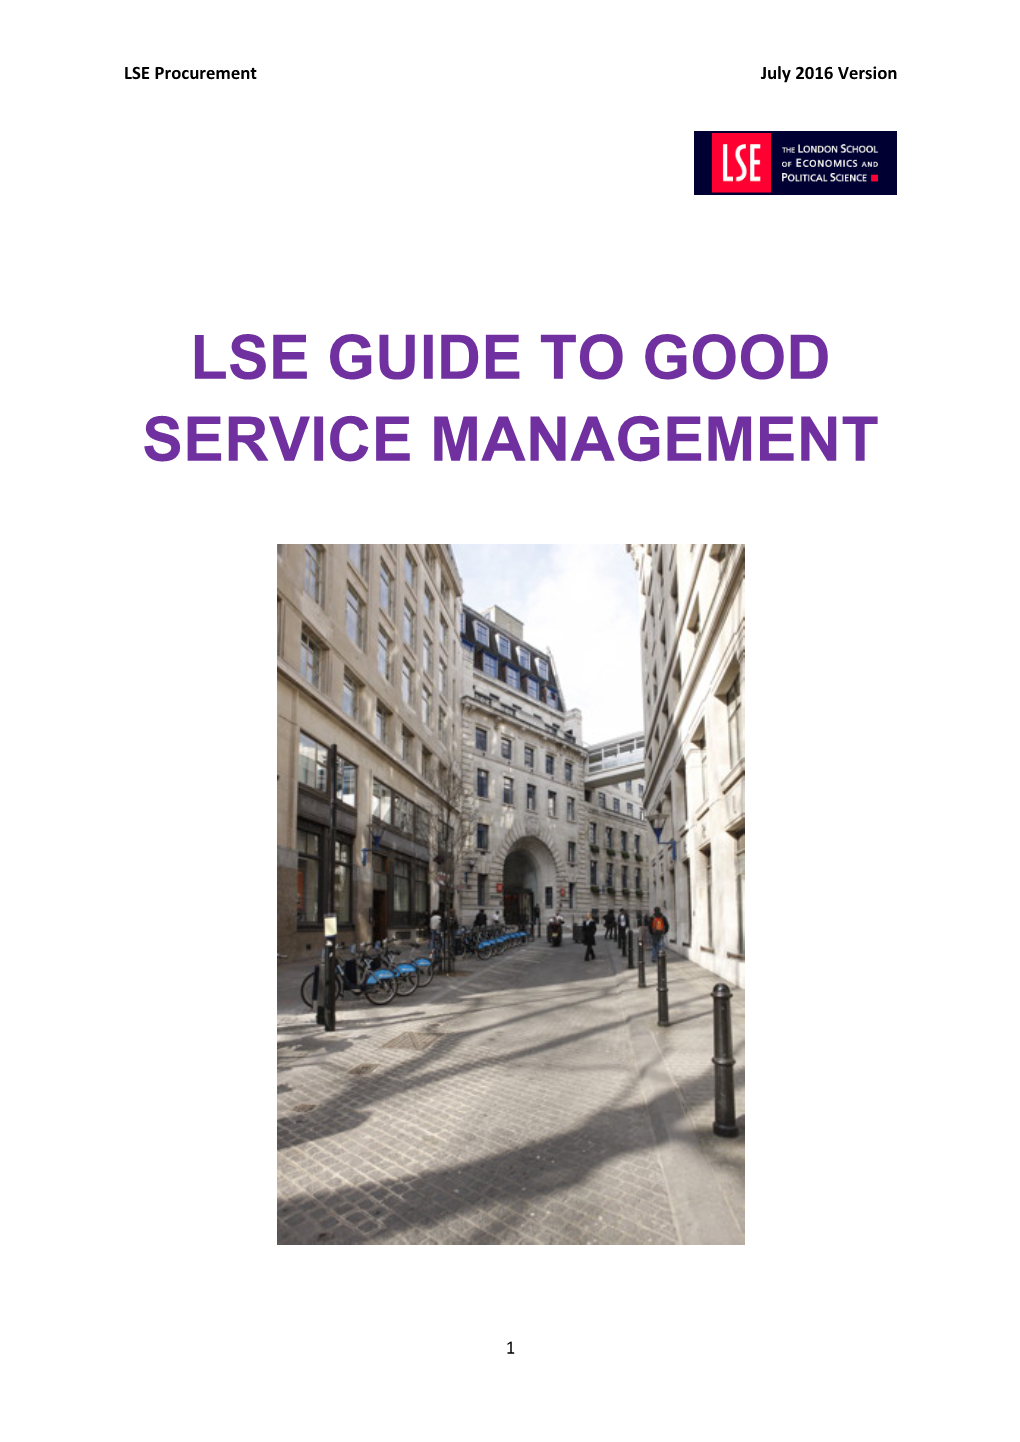 Lse Guide to Good Service Management